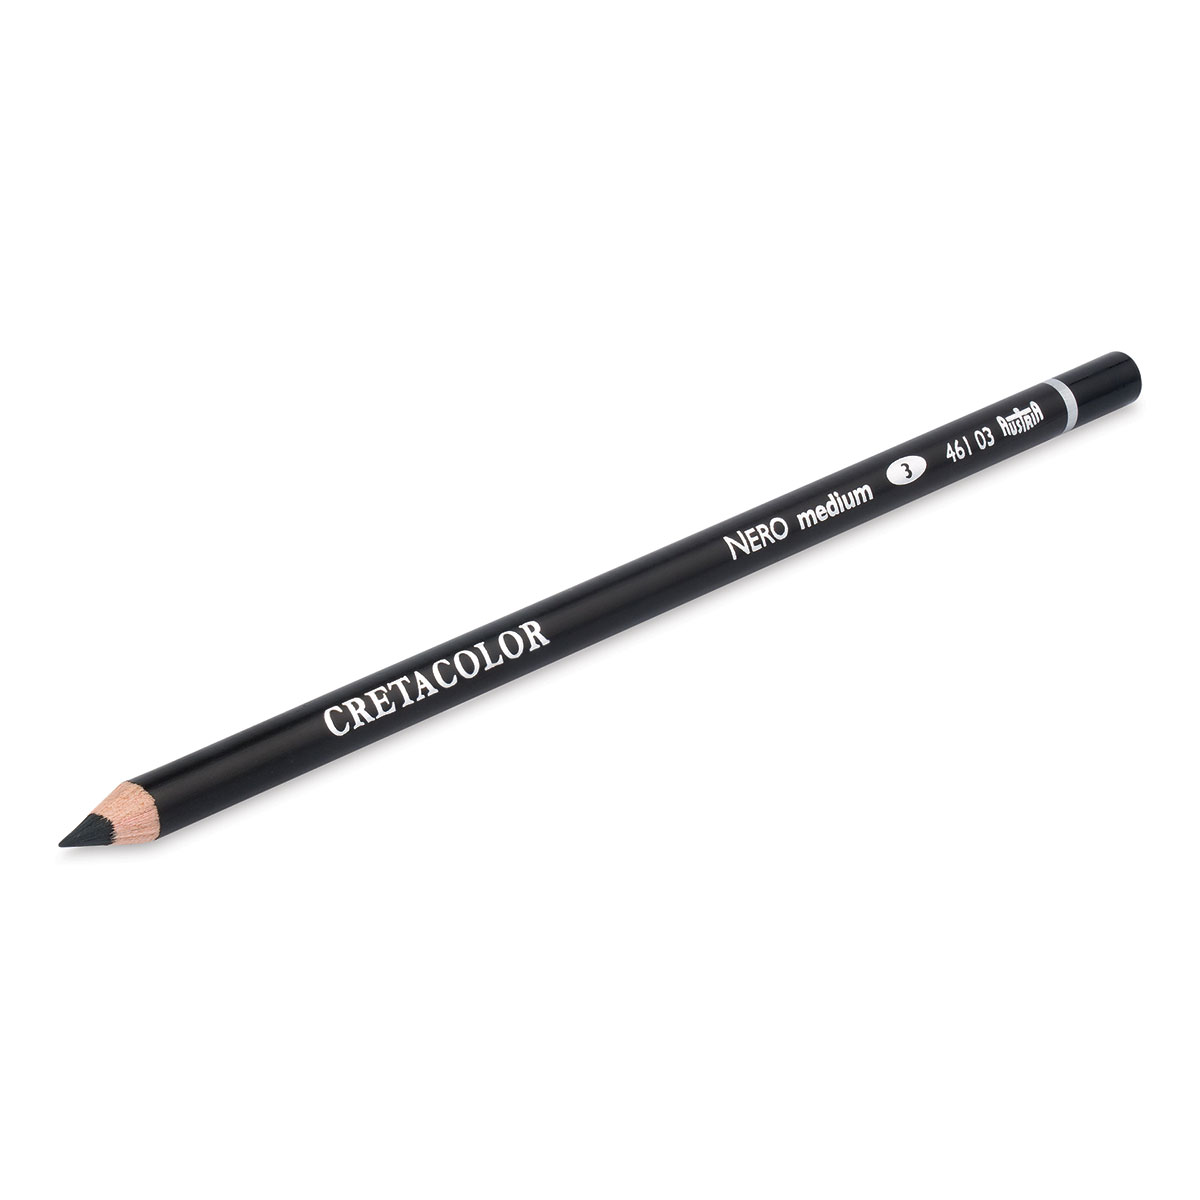 Fueled by Clouds & Coffee: Product Review: Cretacolor Nero Pencil